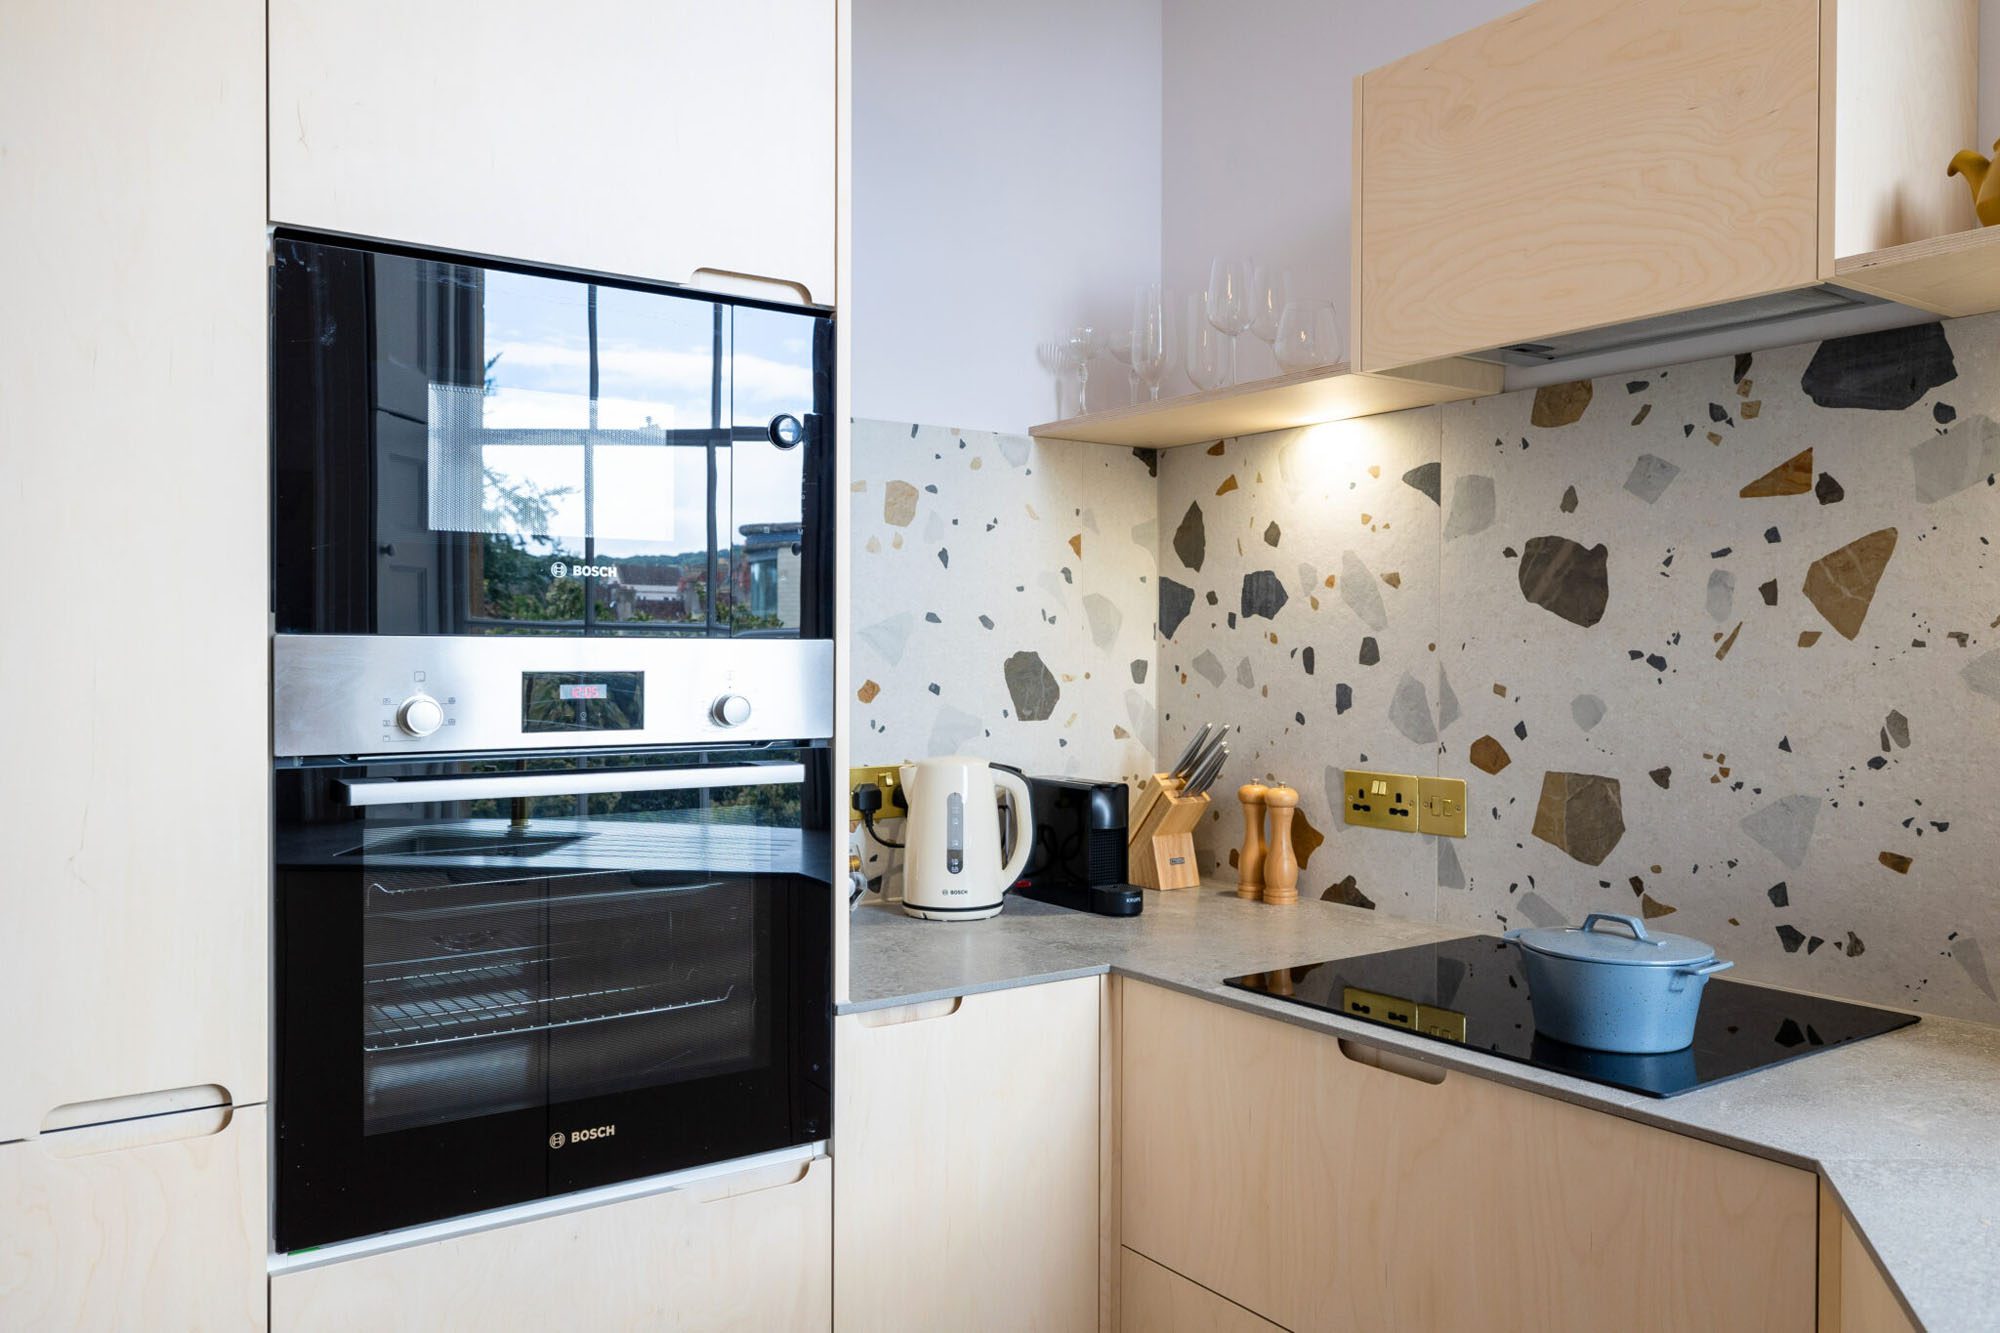 Husk's Writers Retreat Kitchen, which features plywood kitchen fronts and terrazzo tiling.